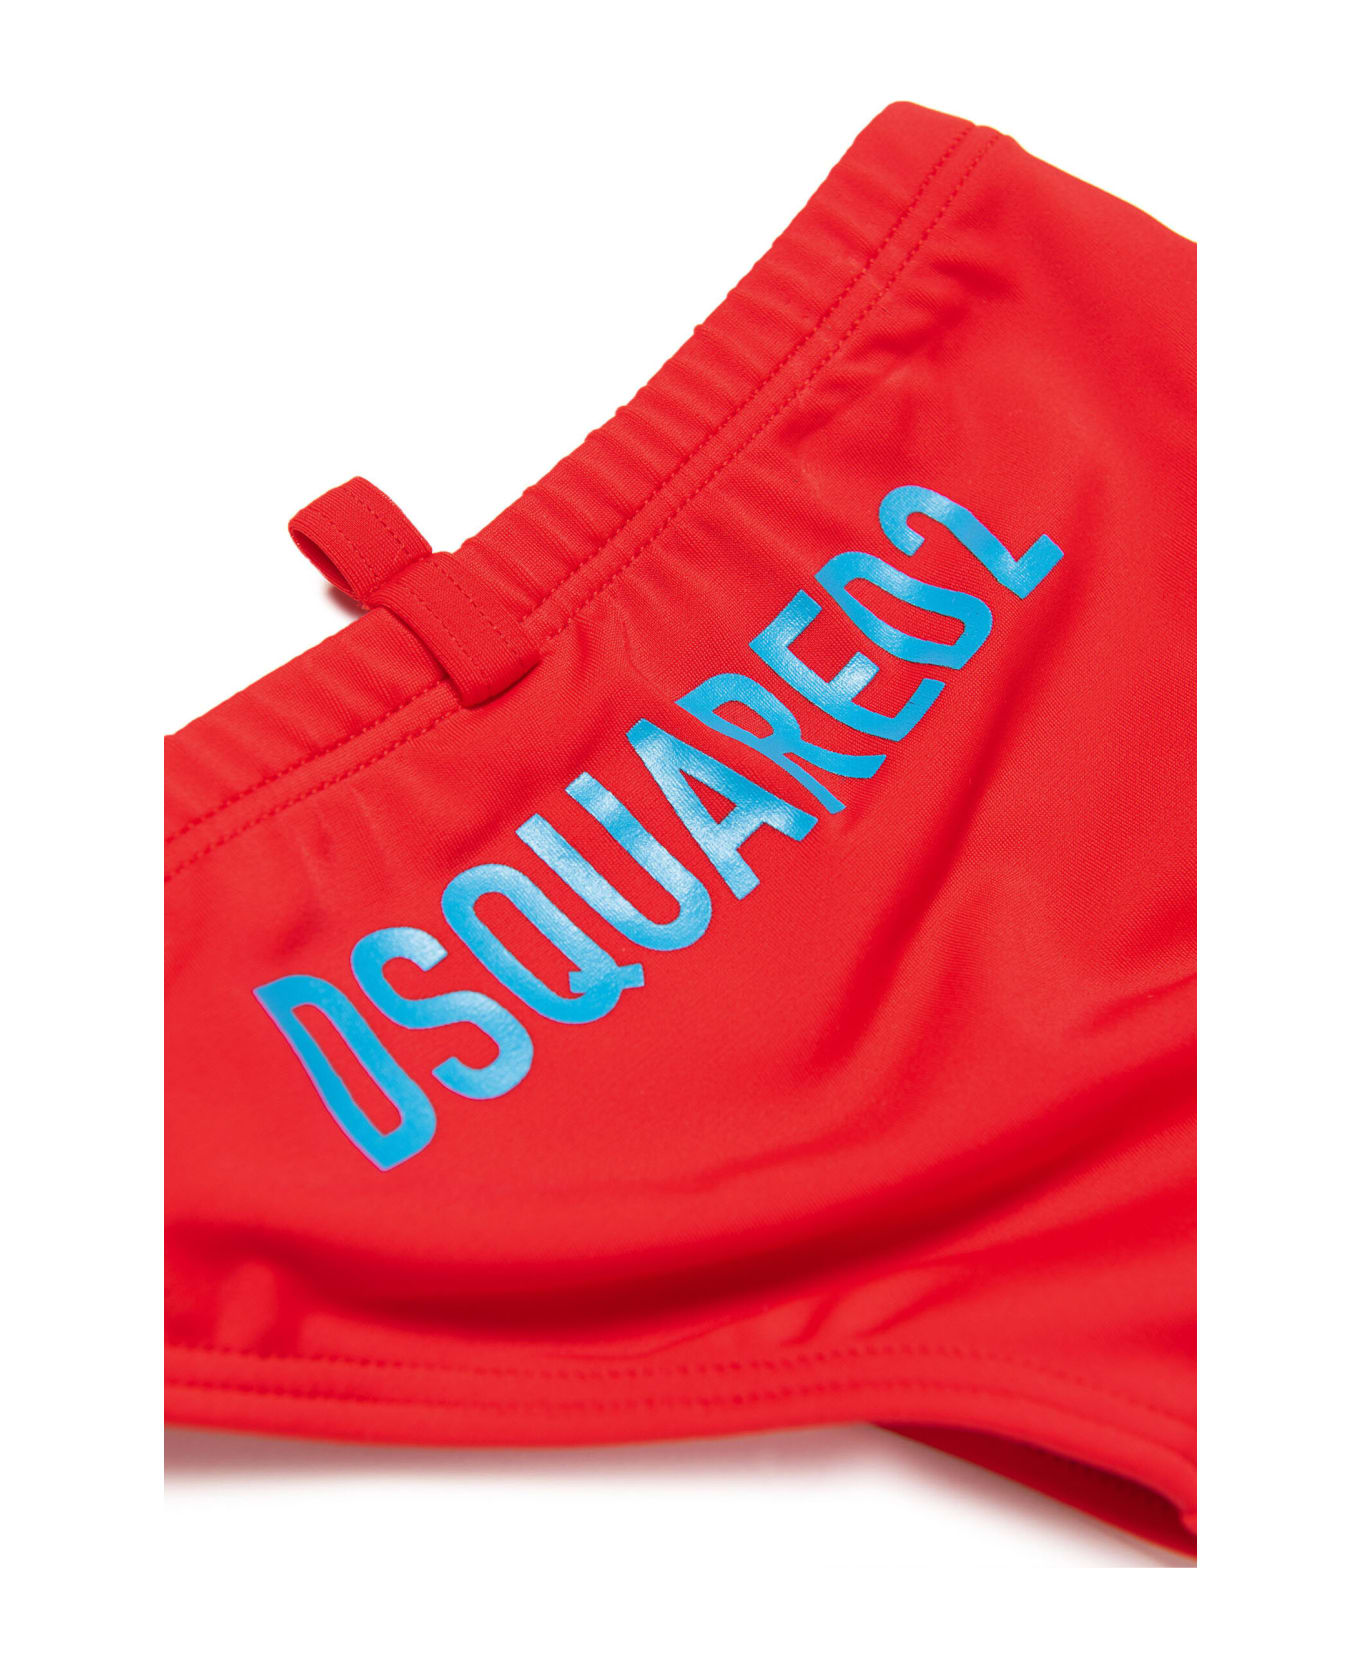 Dsquared2 D2m82b-eco Sw Boxer Dsquared Red Brief Swimming Costume - Fiery red